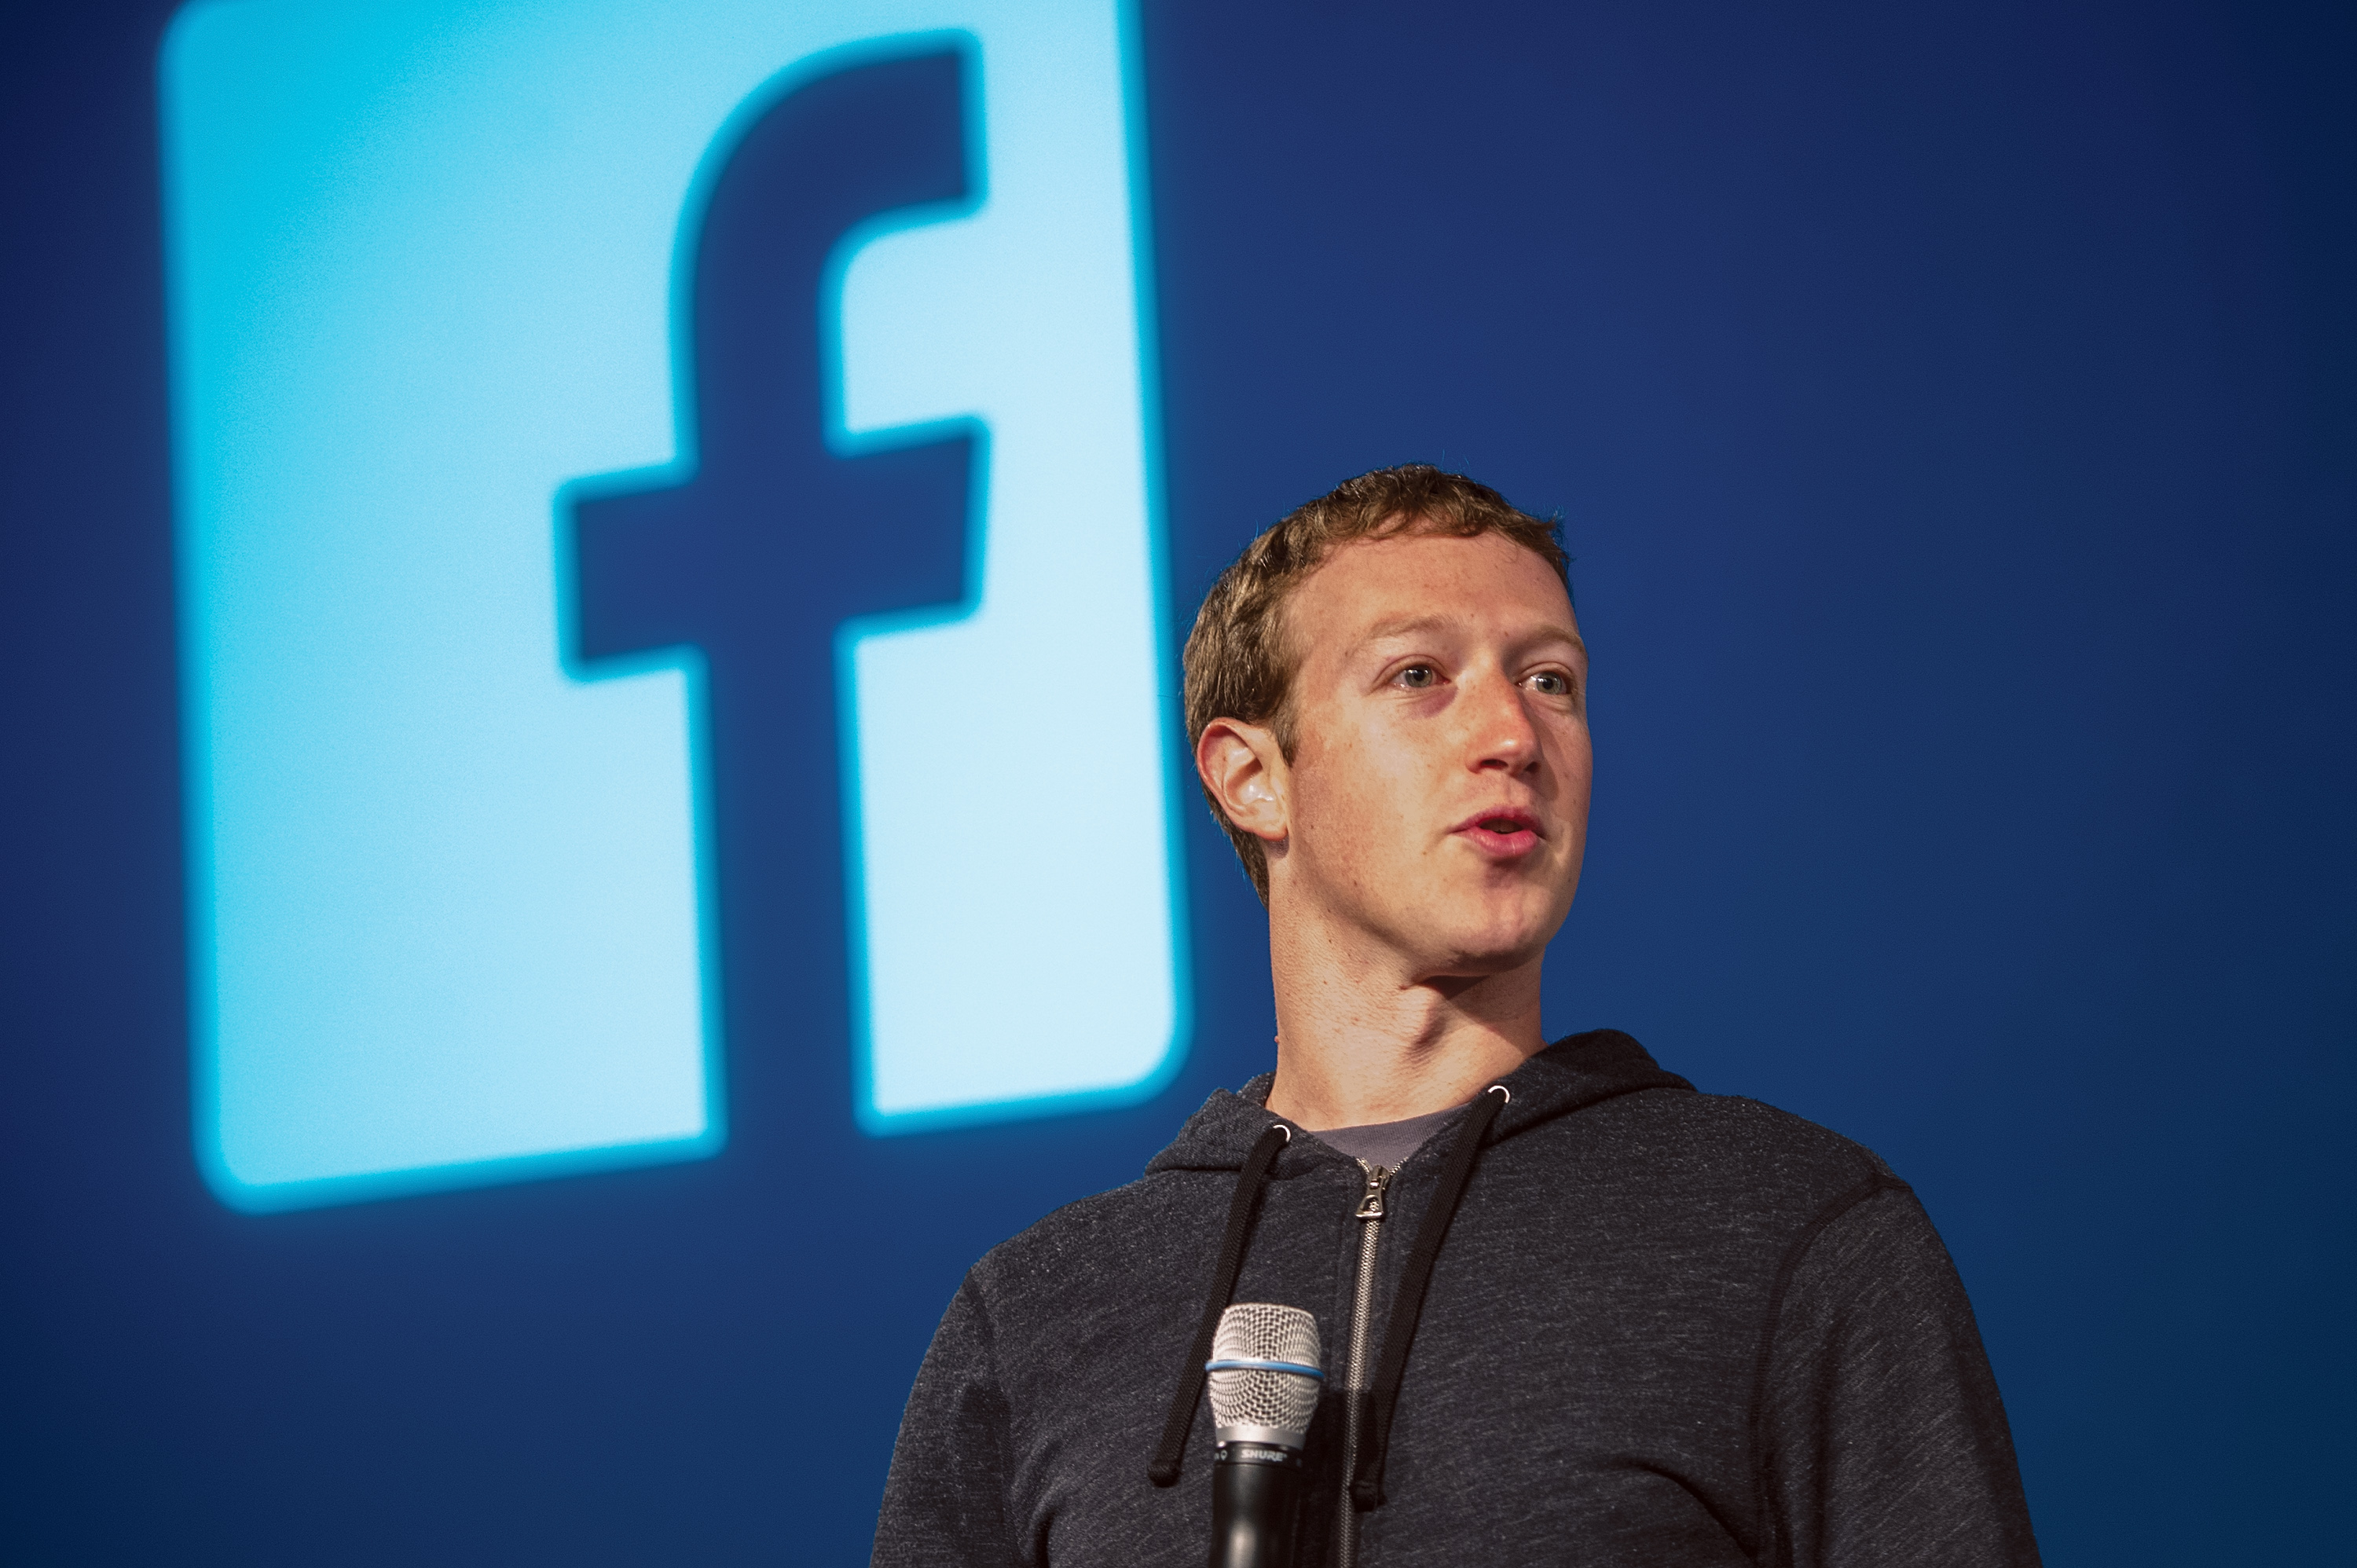 Mark Zuckerberg, chief executive officer and founder of Facebook Inc., speaks during an event at the company's headquarters in Menlo Park, Calif. on March 7, 2013. (David Paul Morris—Bloomberg/Getty Images)